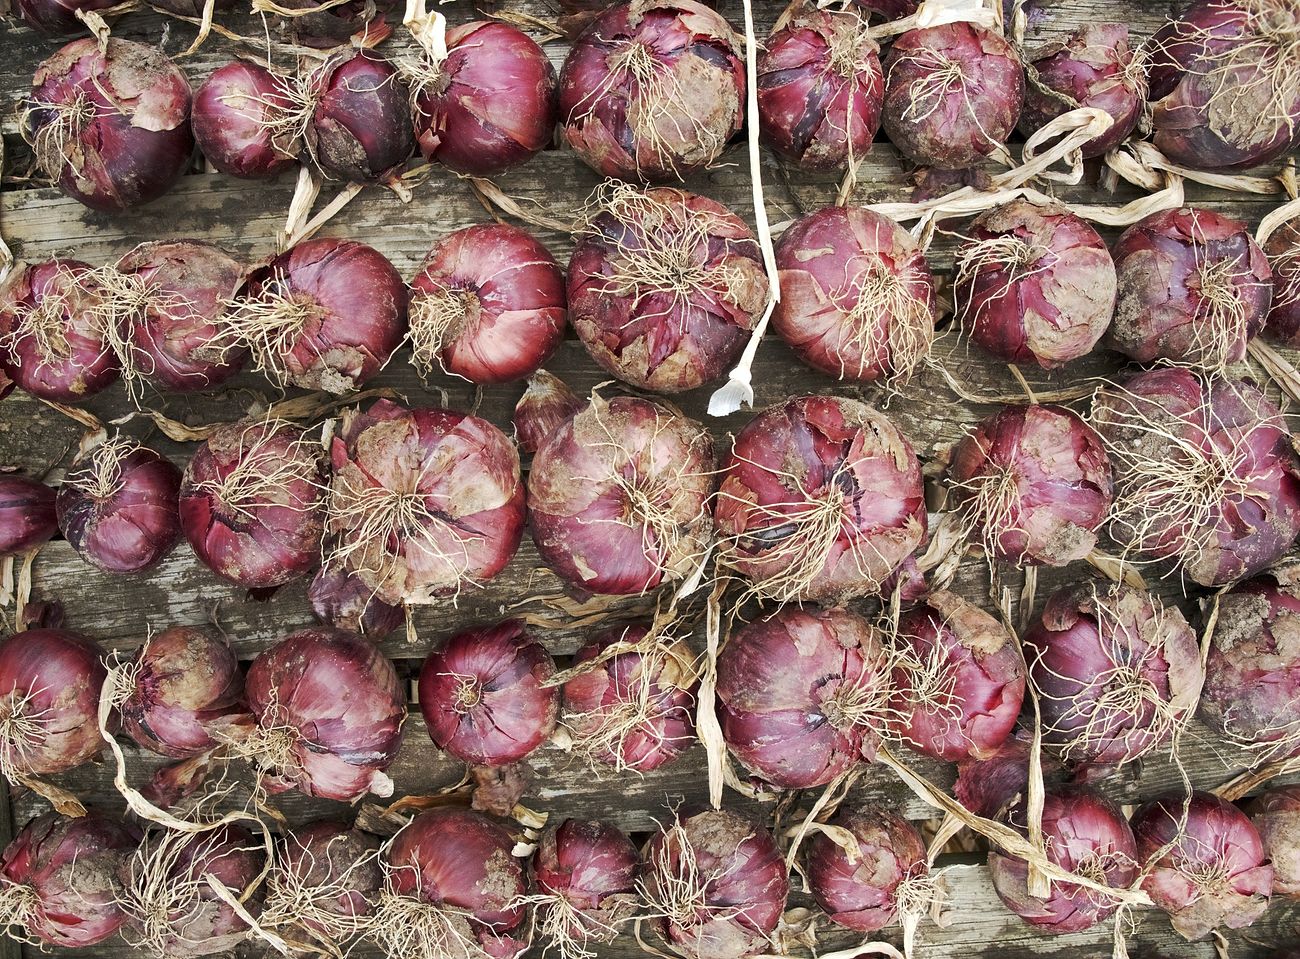 What are the best ways to store and transport onions in Kenya?